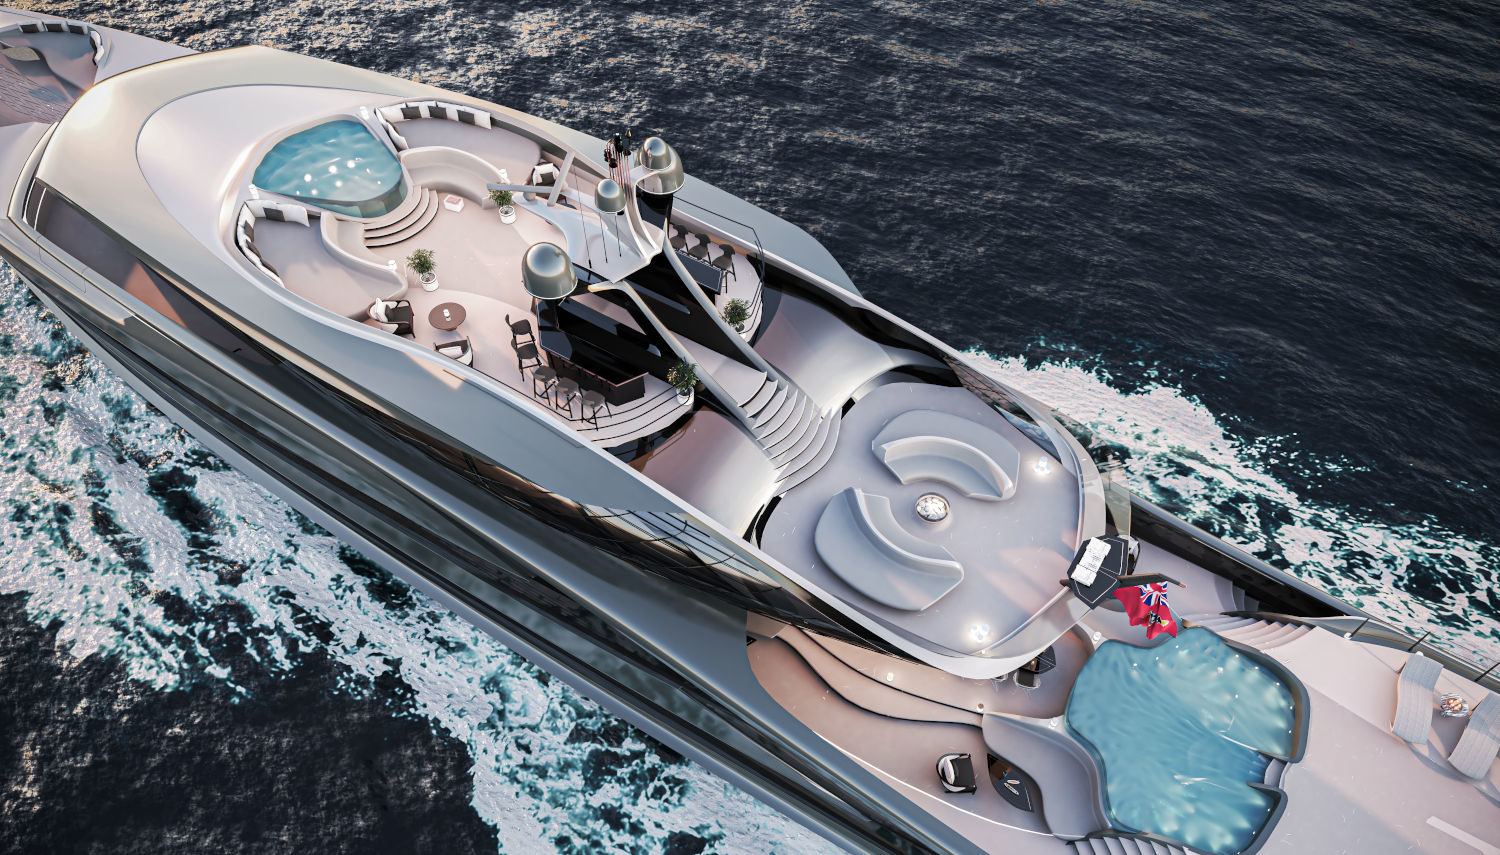 Vripack - yacht concepts - Futura - 100% fossil-free yacht - Inspired by nature